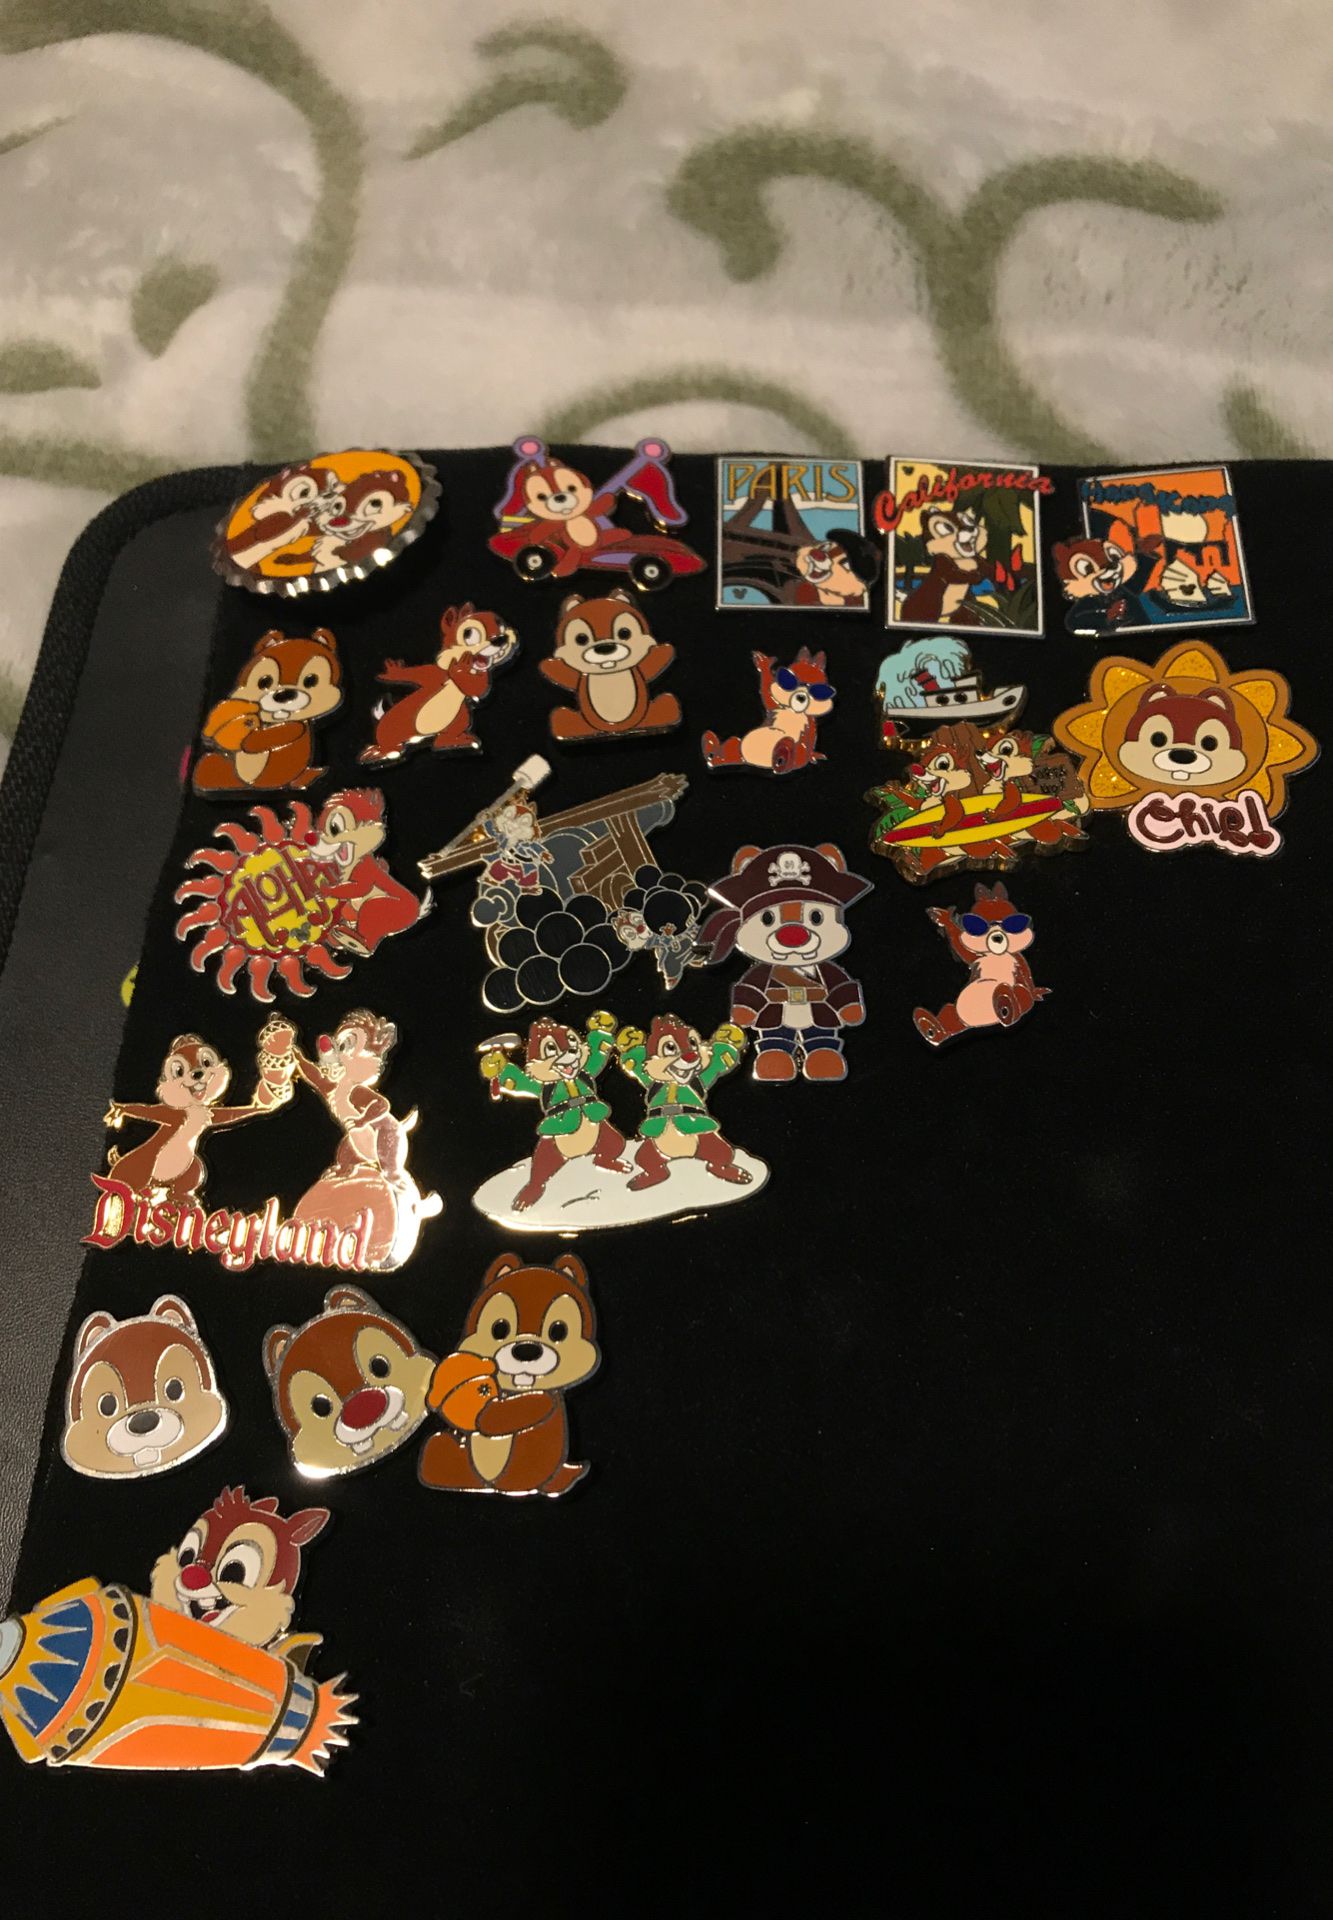 Disney pins Chip and dale (PRICES VARY BY PIN)